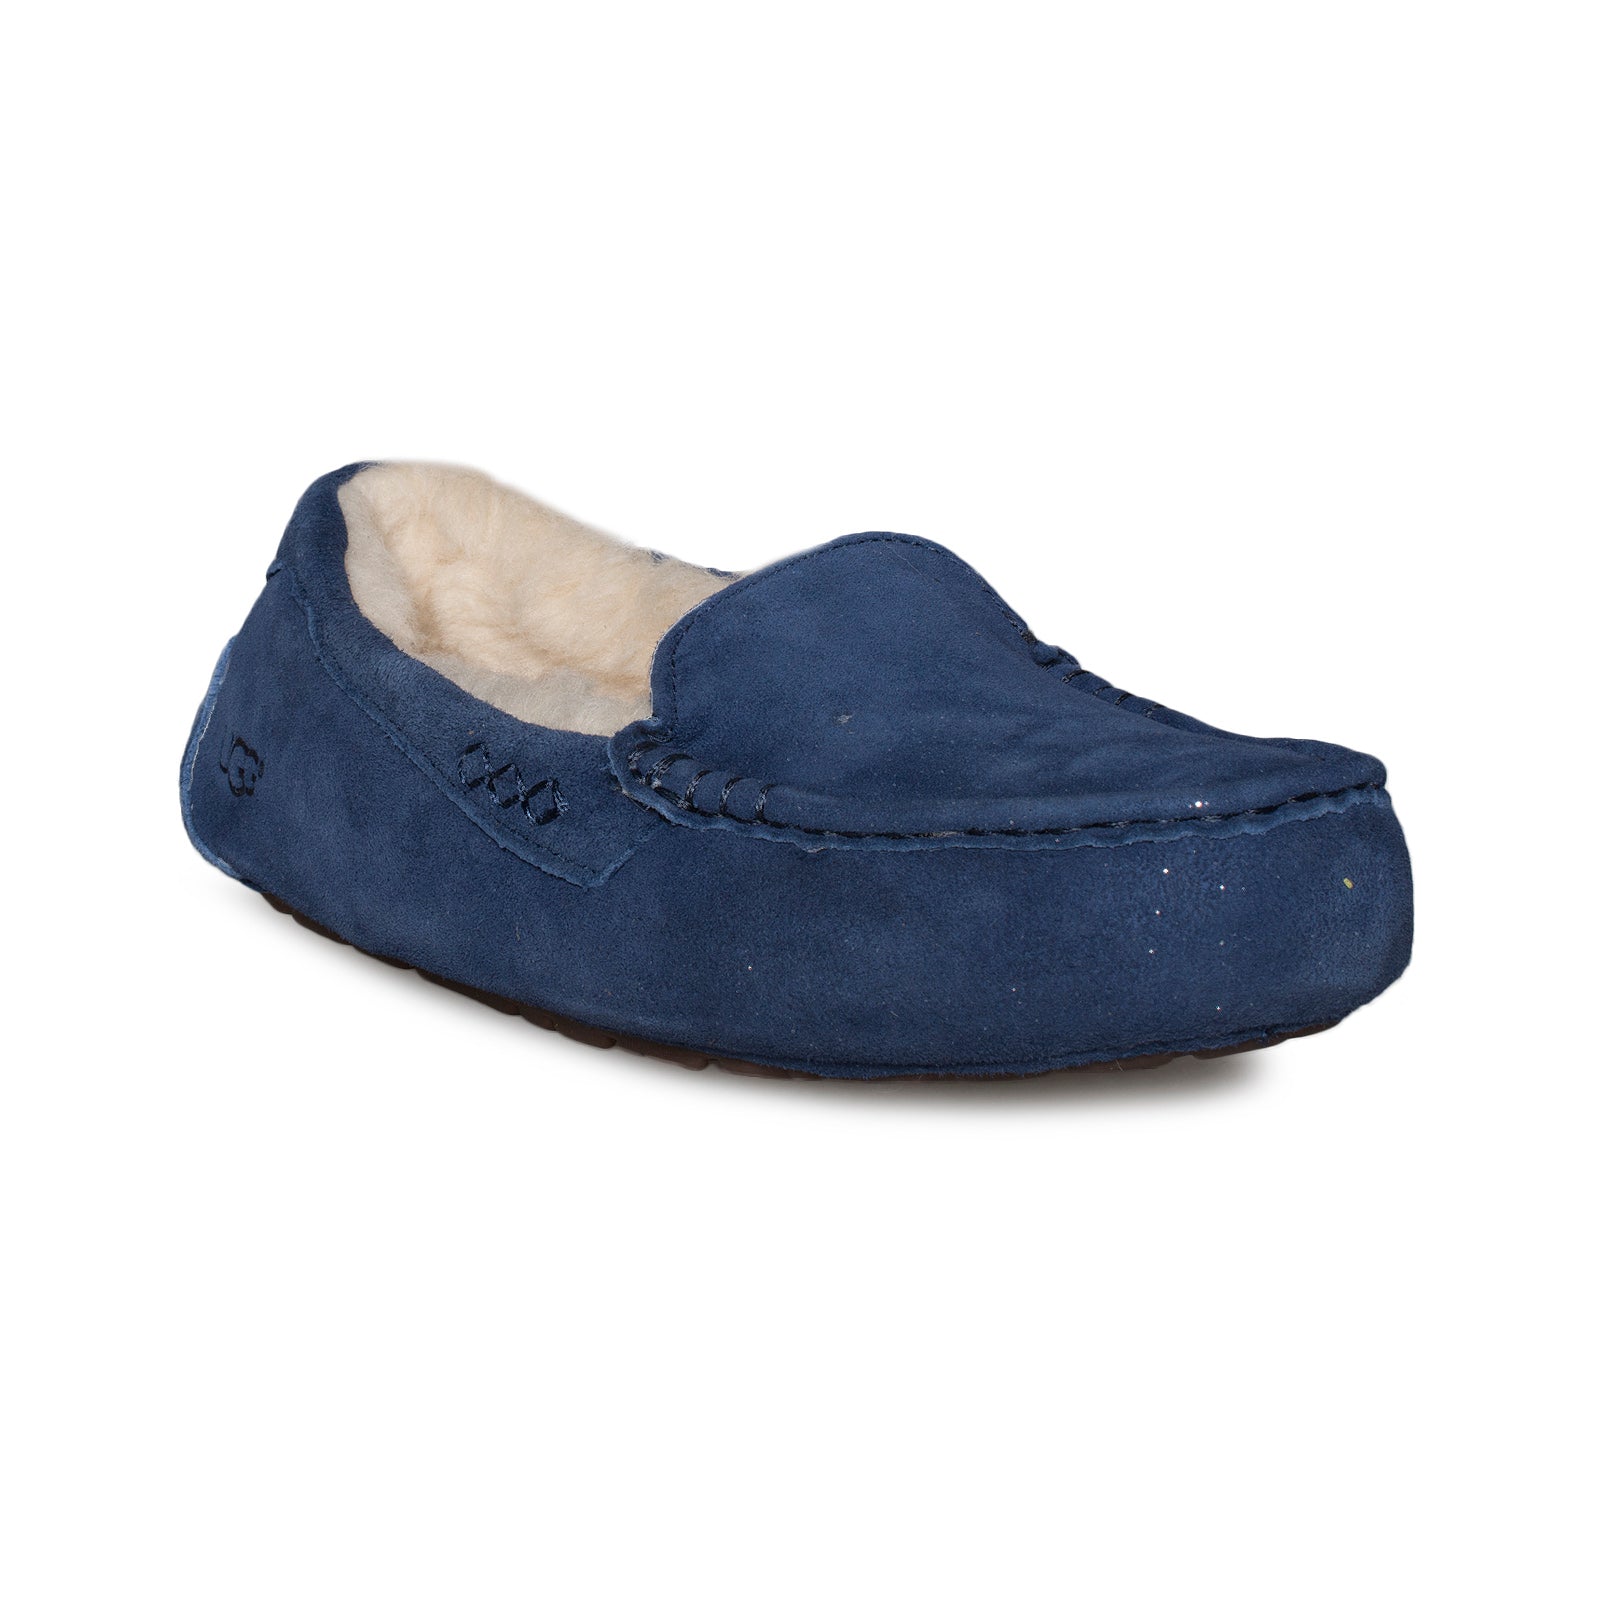 ansley milky way ugg slippers